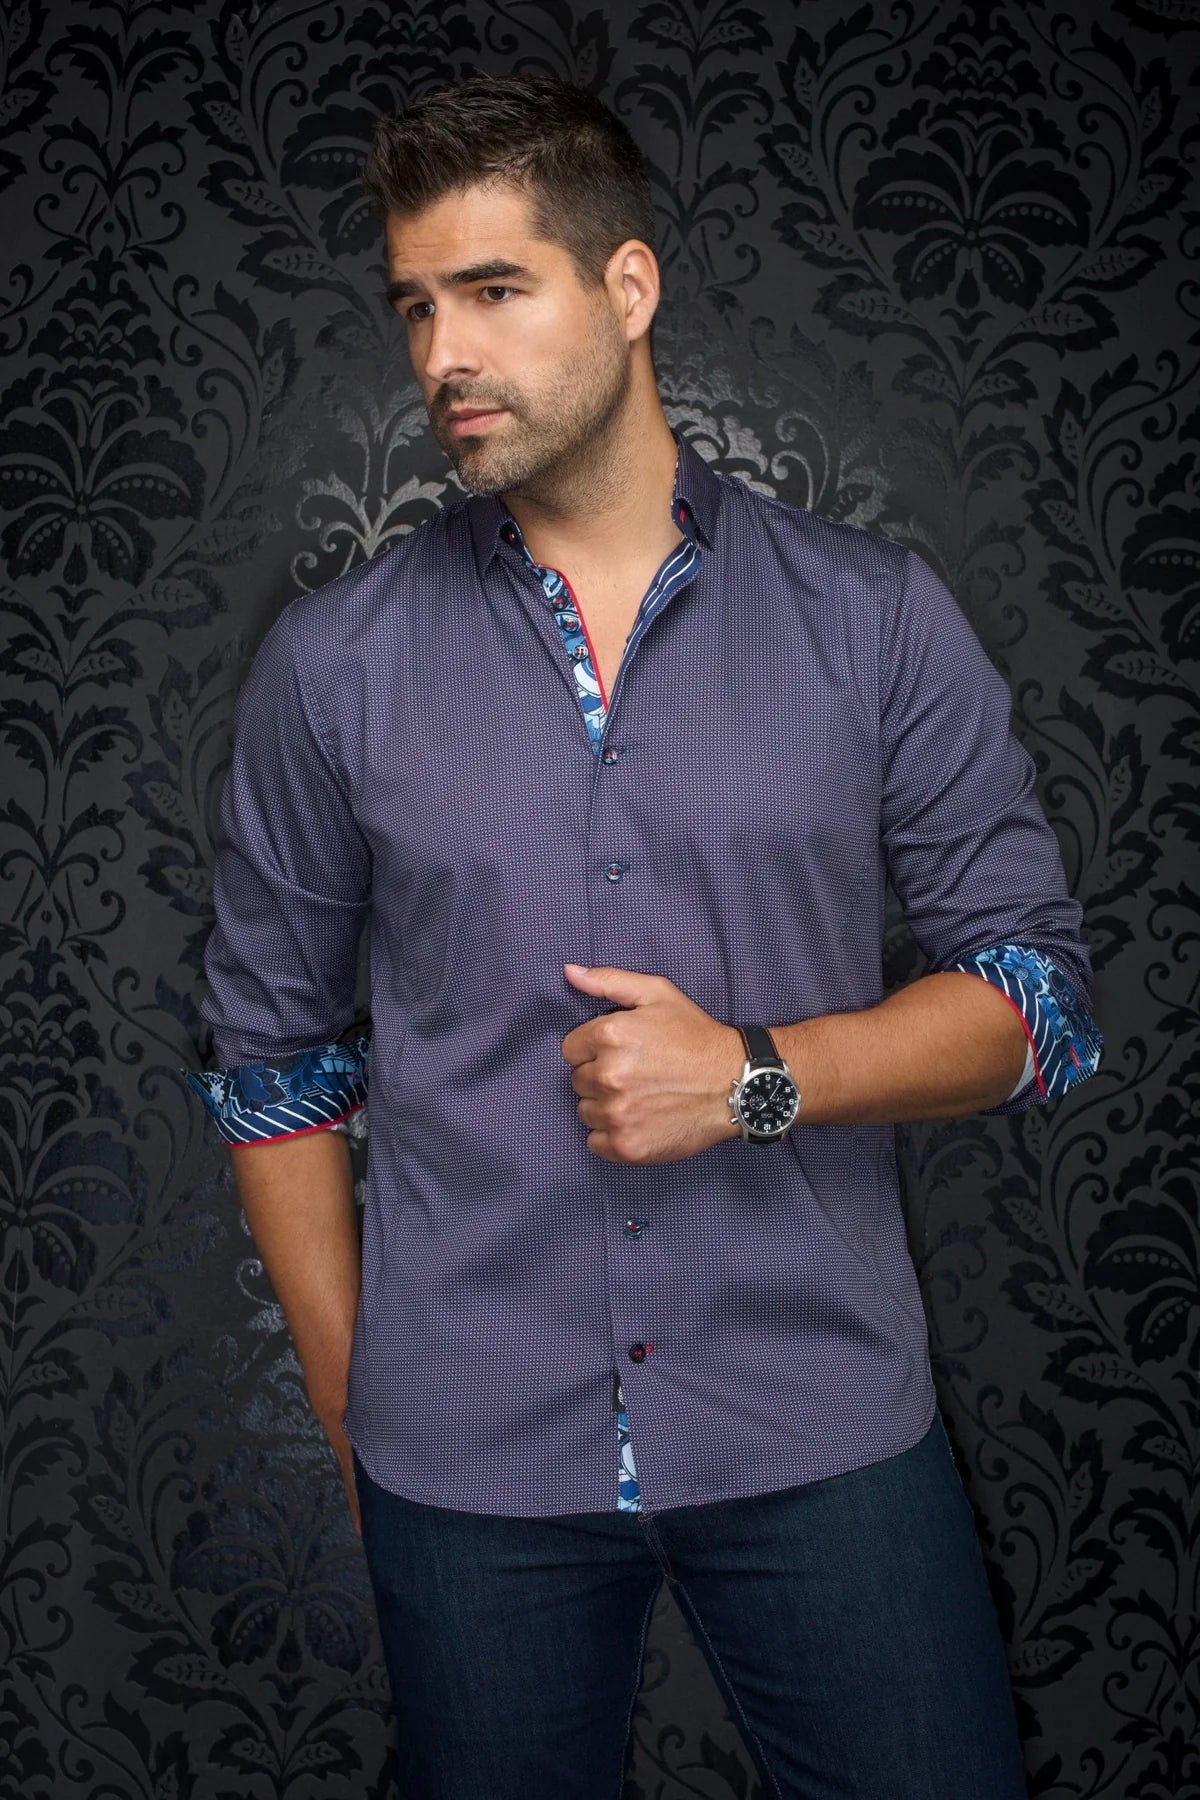 Men's casual dress shirt. Stand out with contrasting patterns and sophisticated details. Comfortable with high-end cotton fabric. 